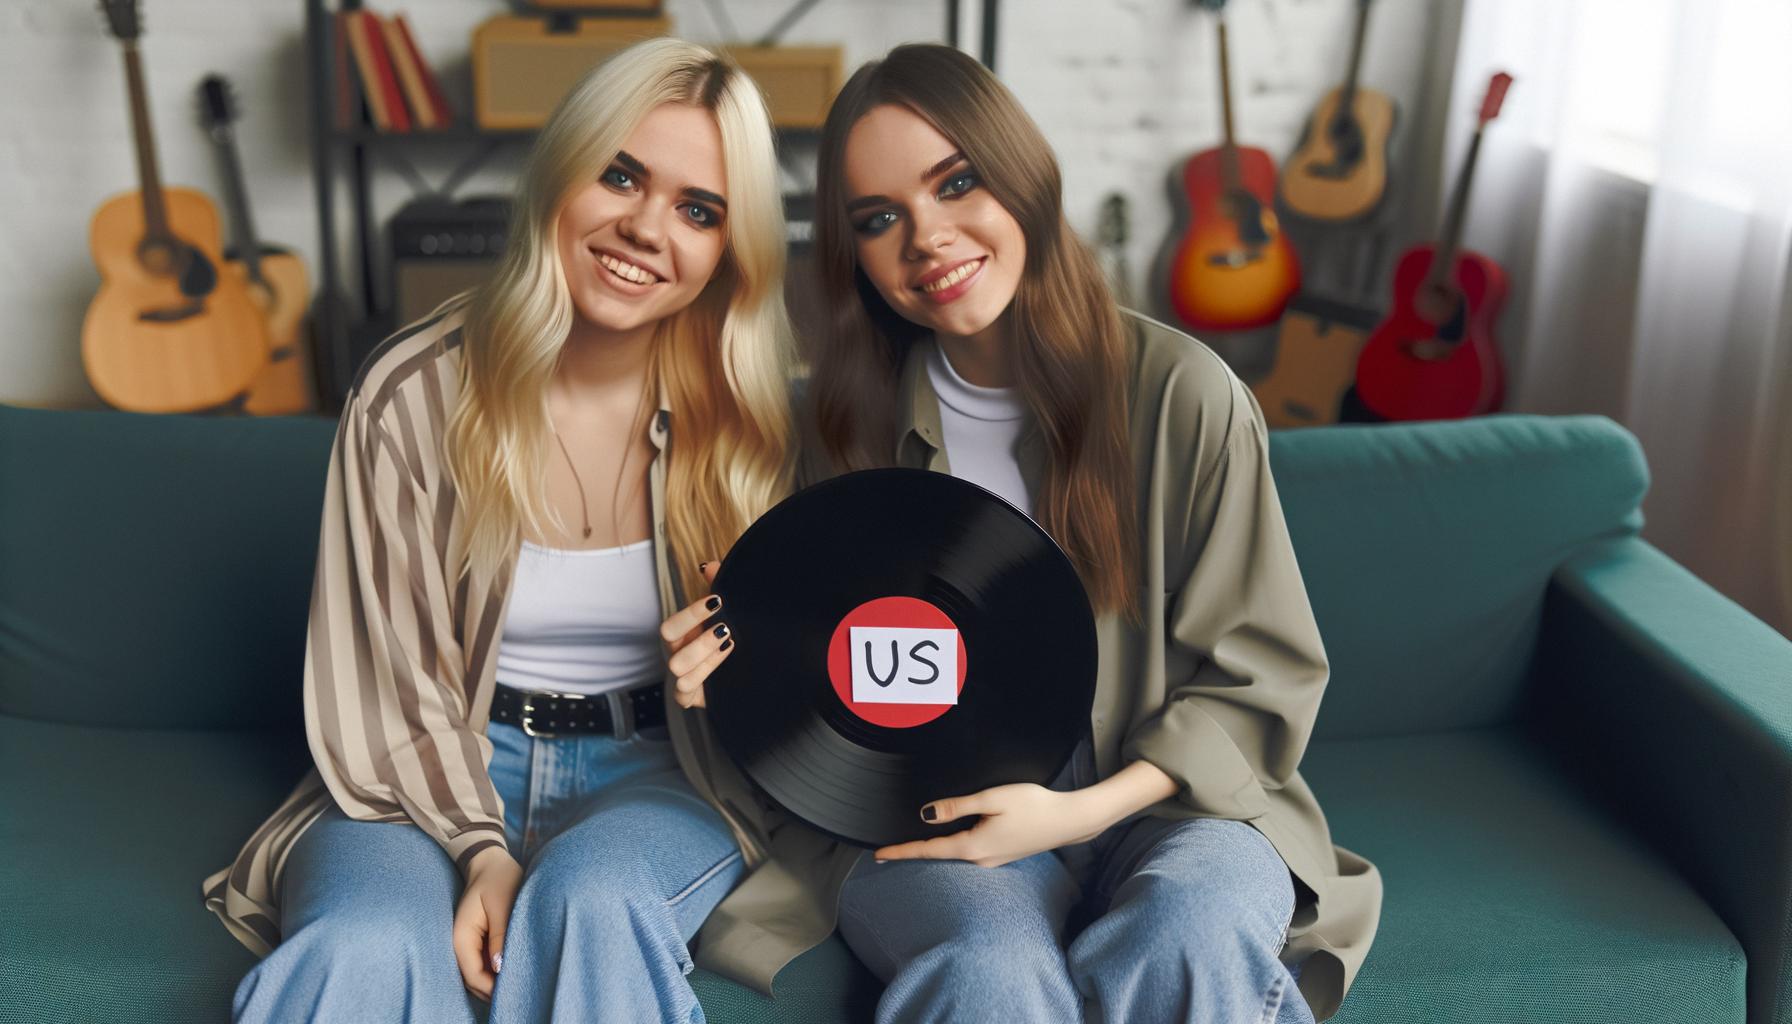 Taylor Swift, Gracie Abrams release new song 'Us'